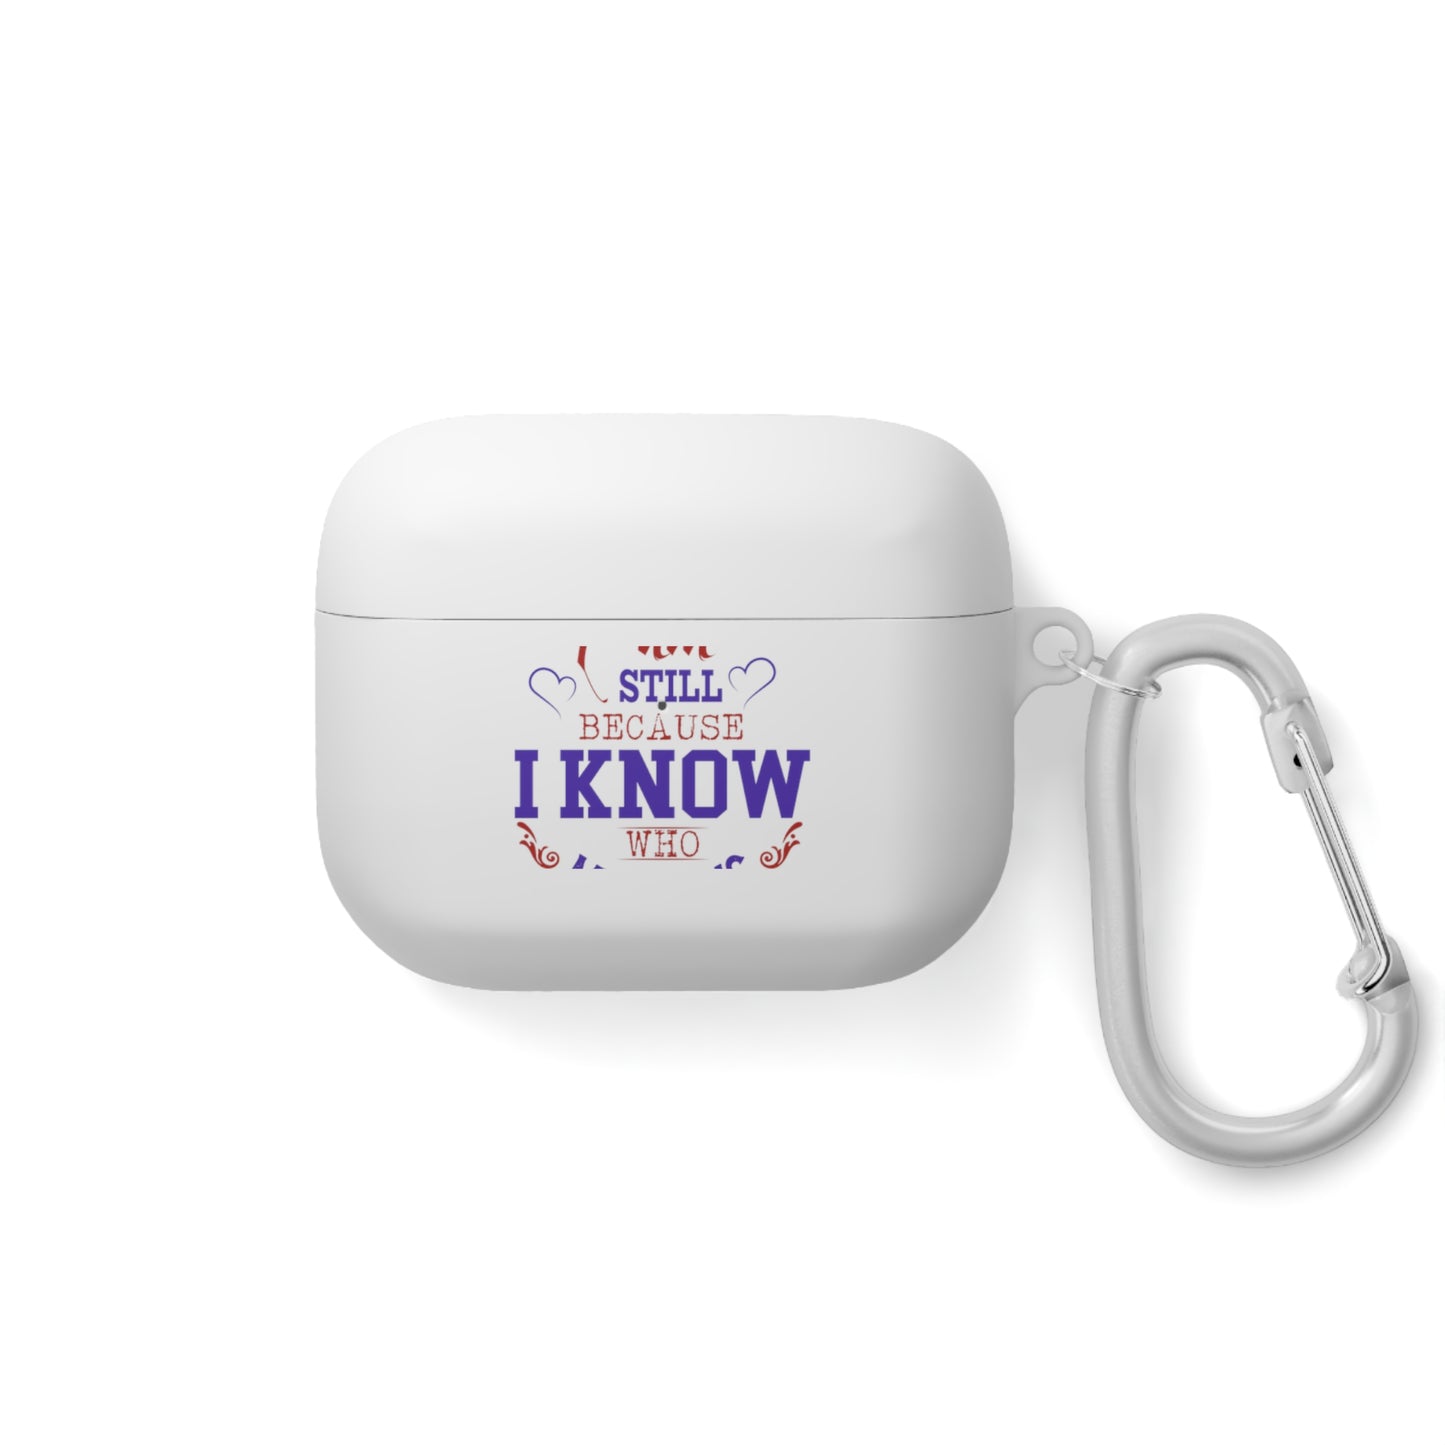 I Am Still Because I Know Who My God Is Airpod / Airpods Pro Case cover